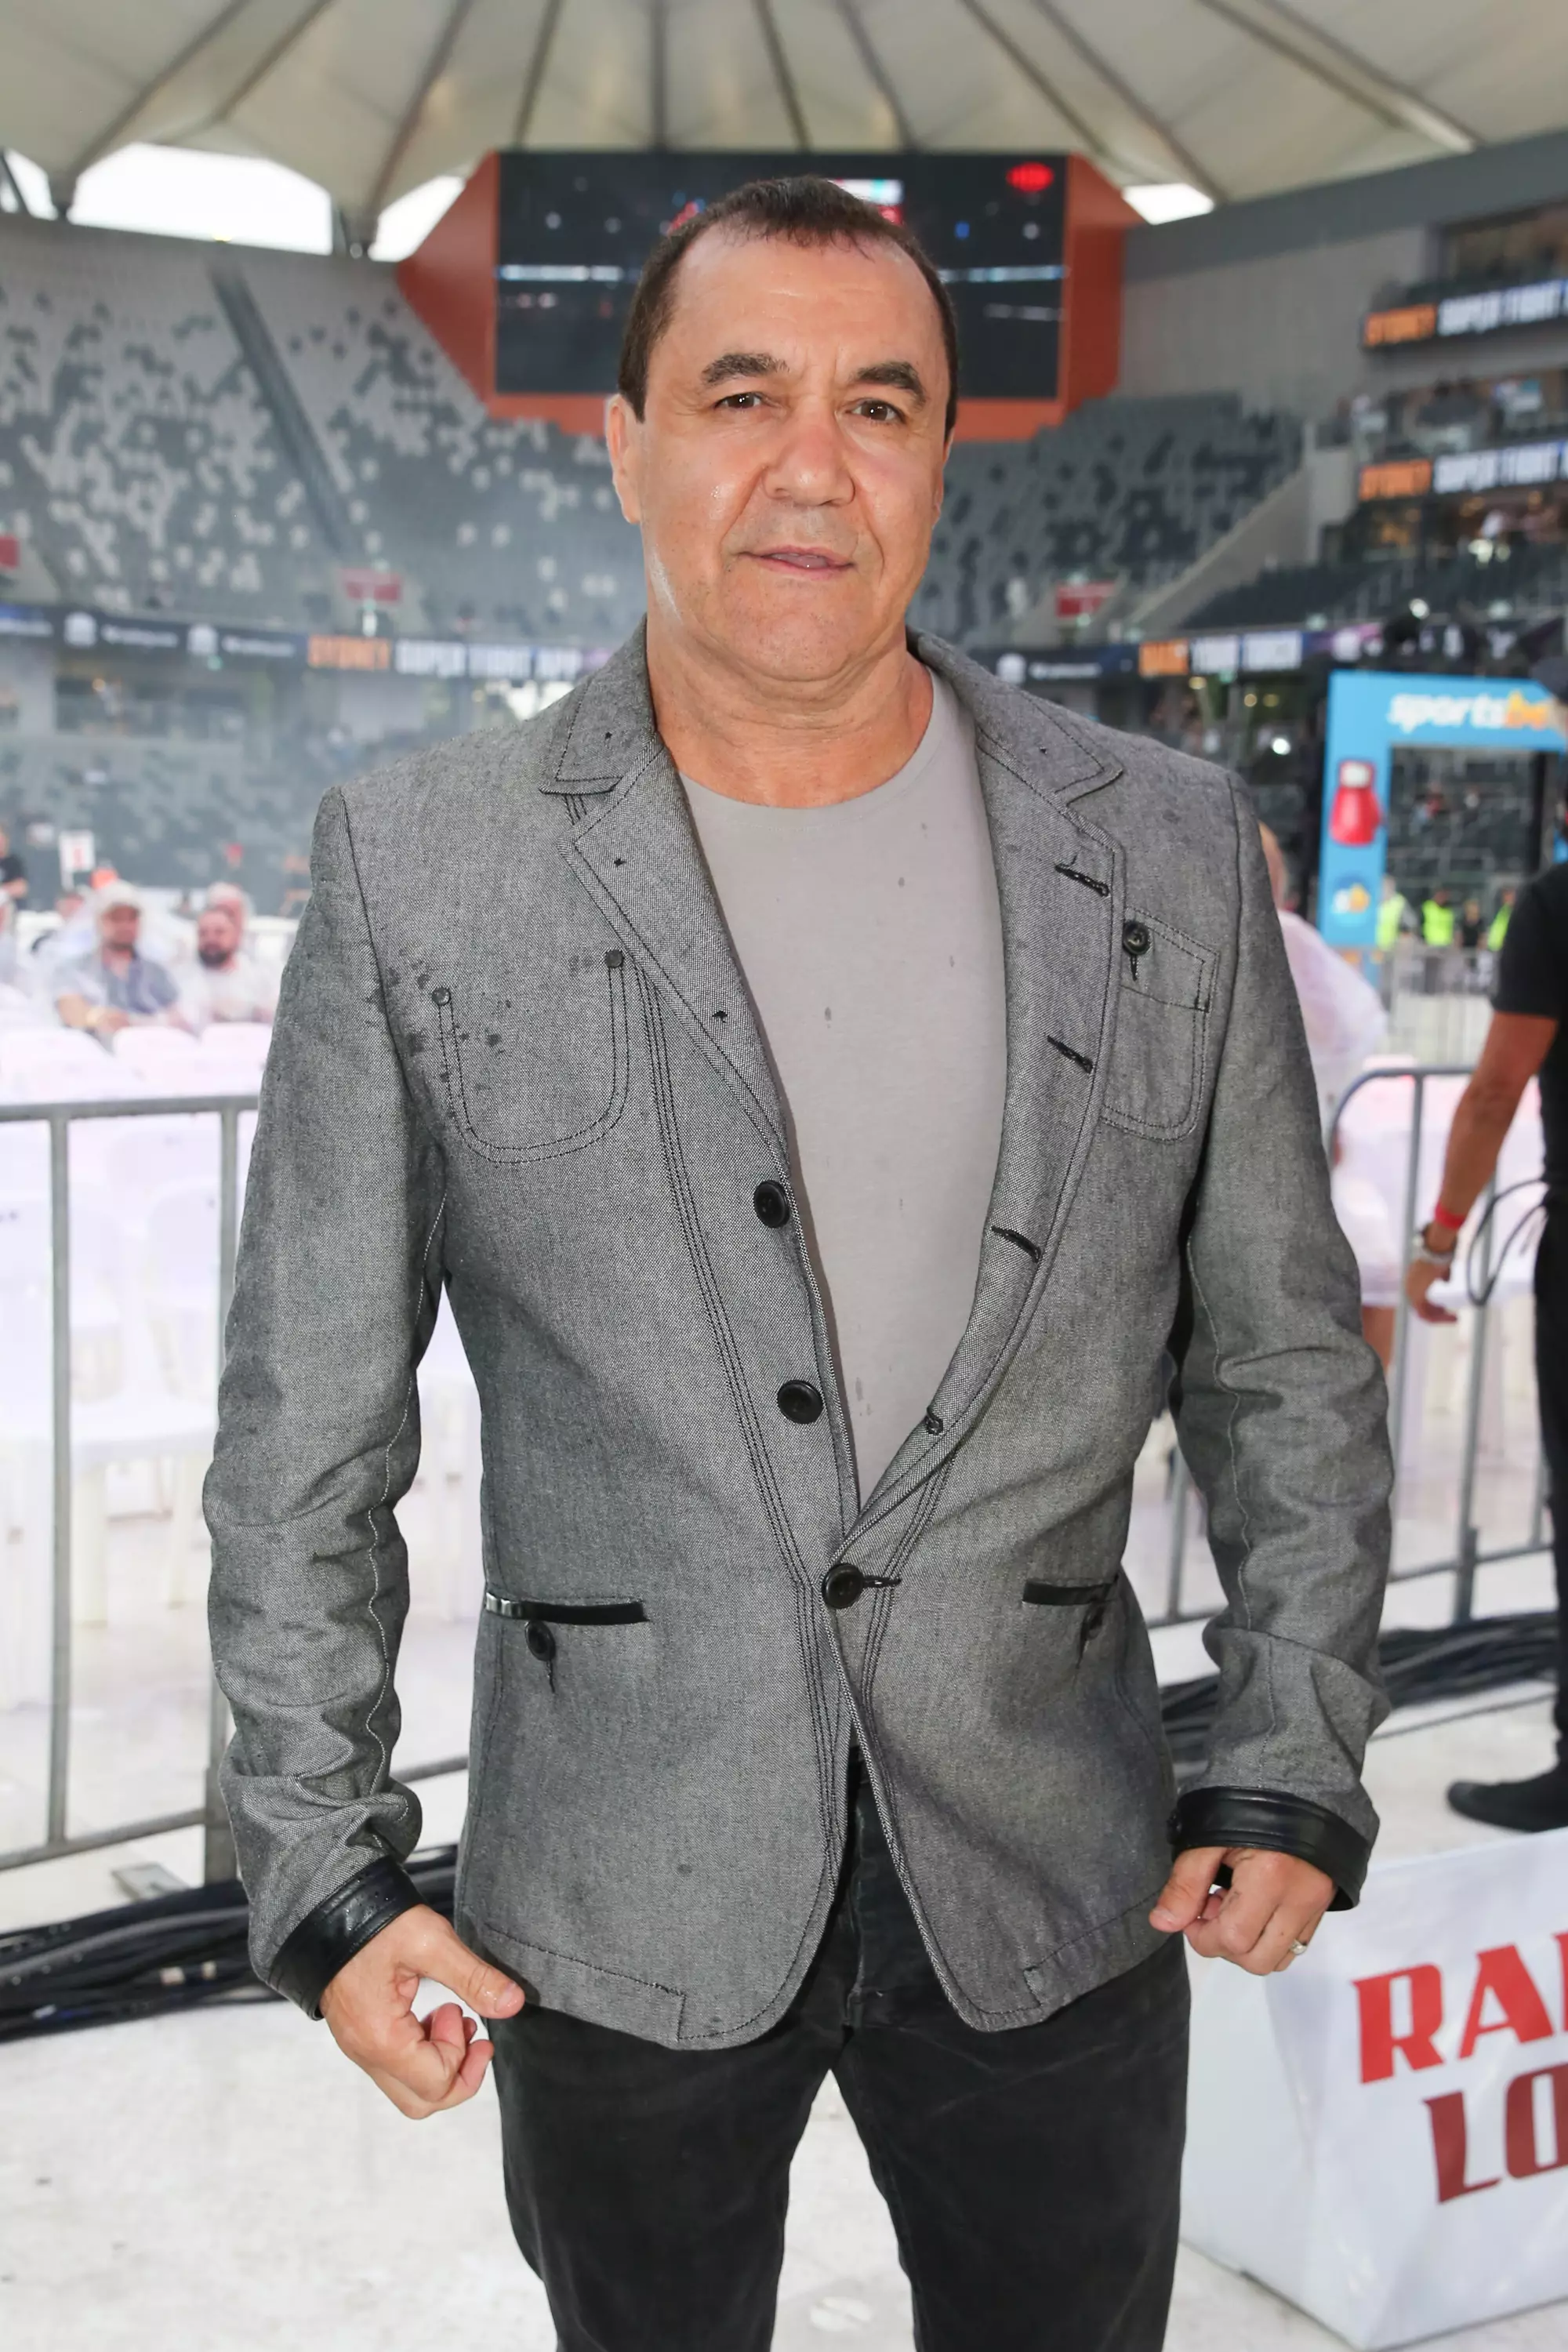 Boxing royalty Jeff Fenech was in the commentary box for the fight.